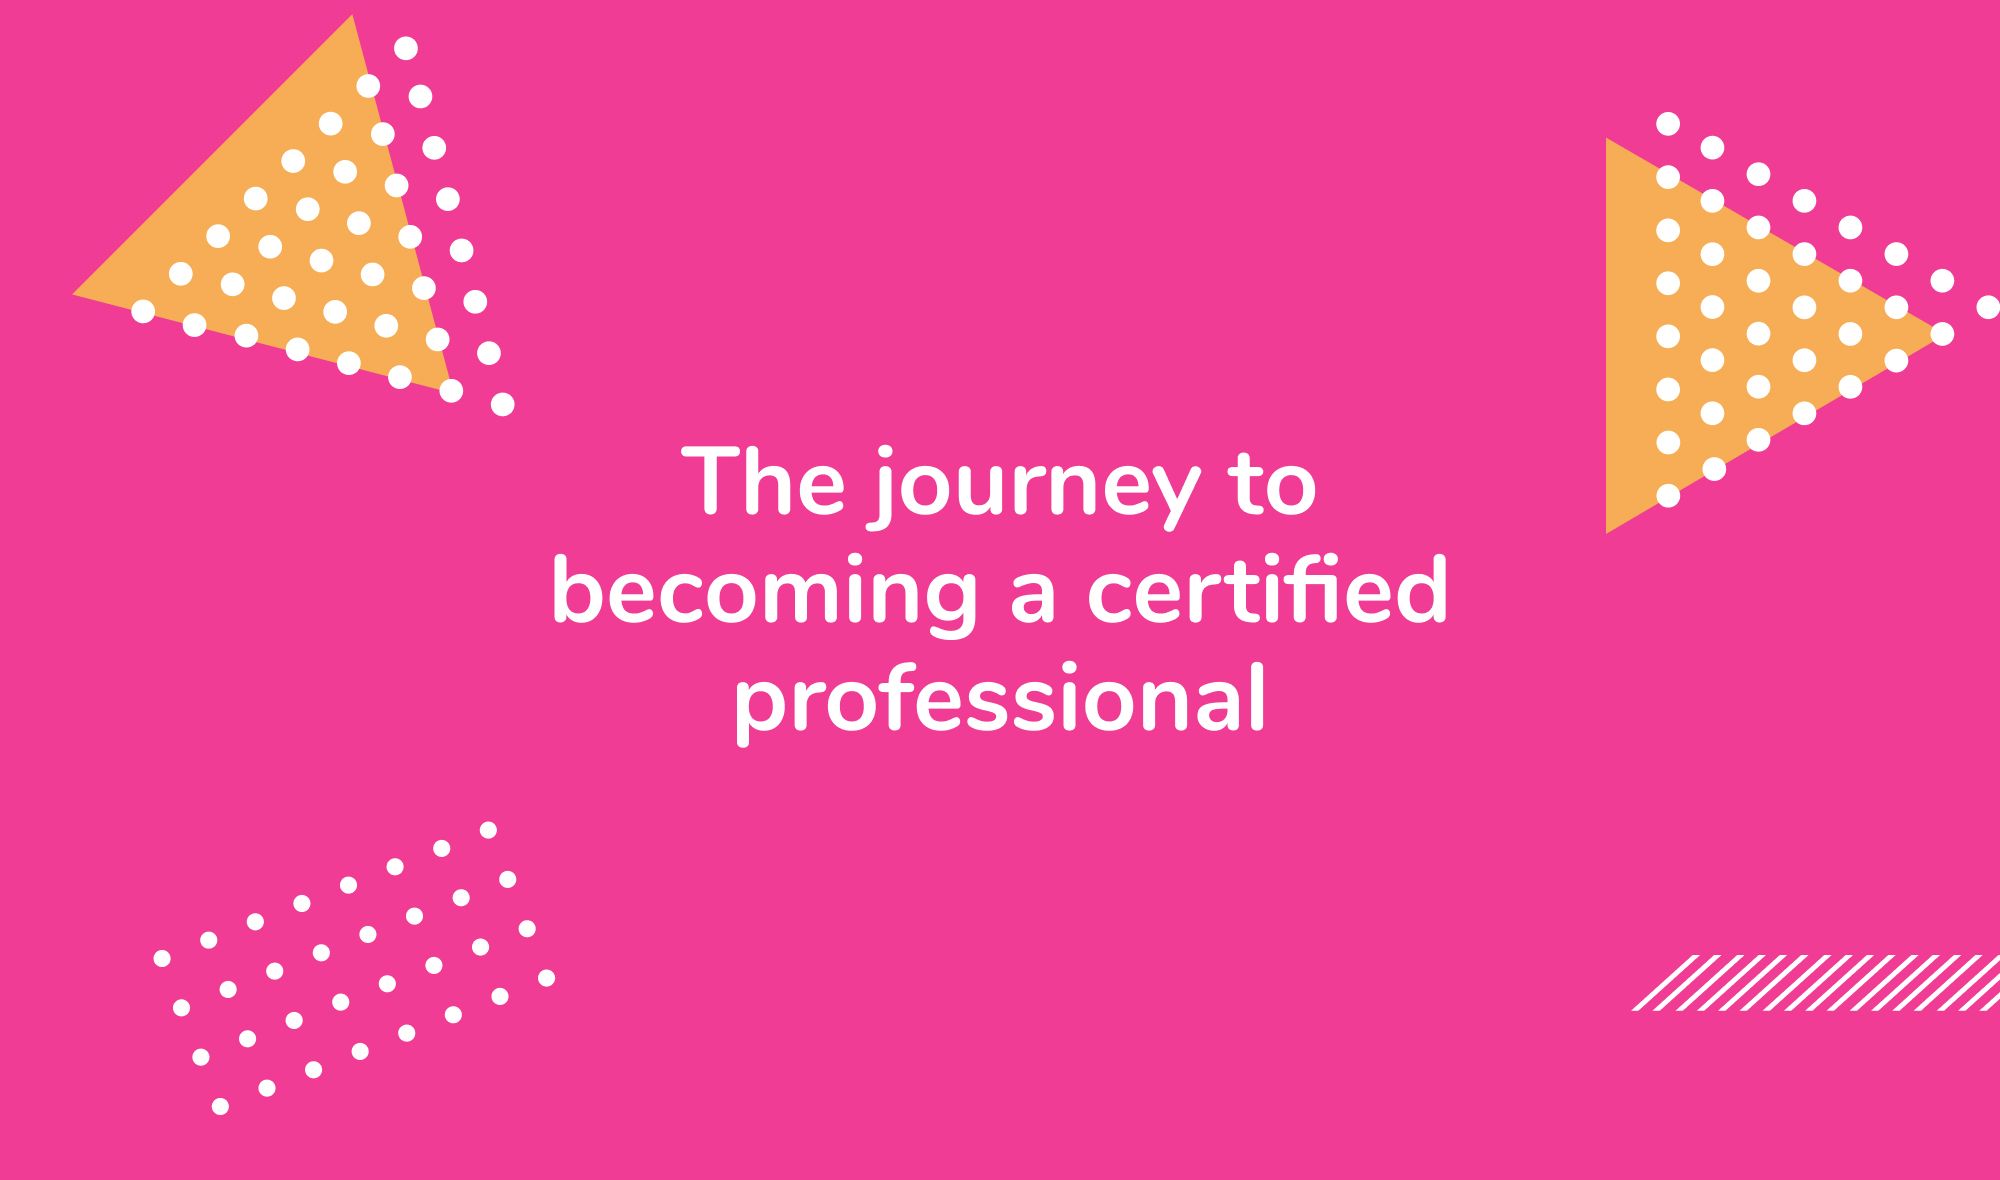 The journey to becoming a certified professional